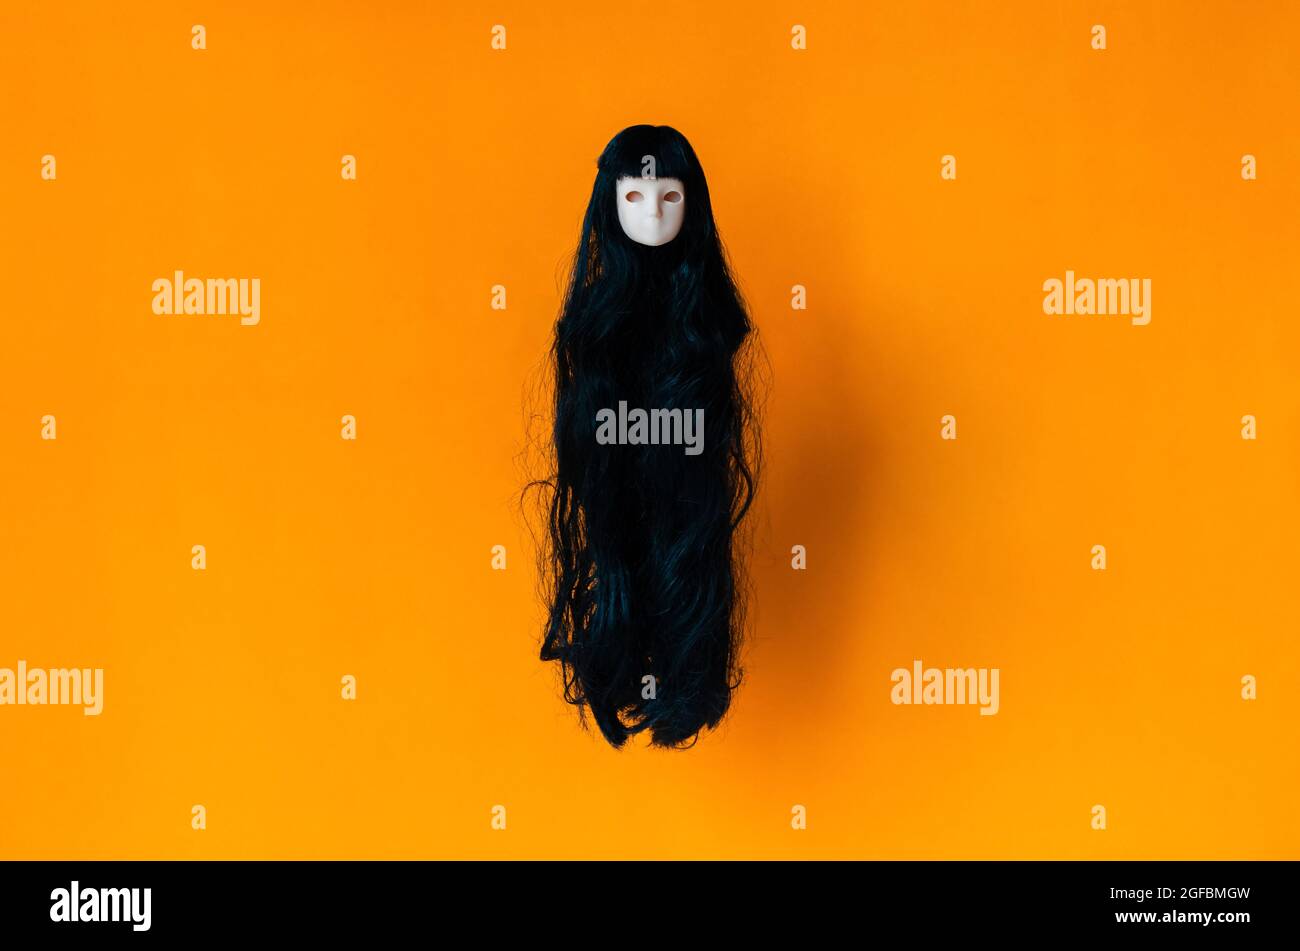 Long hair female ghost doll flying on orange background. Minimal Halloween scary concept. Stock Photo